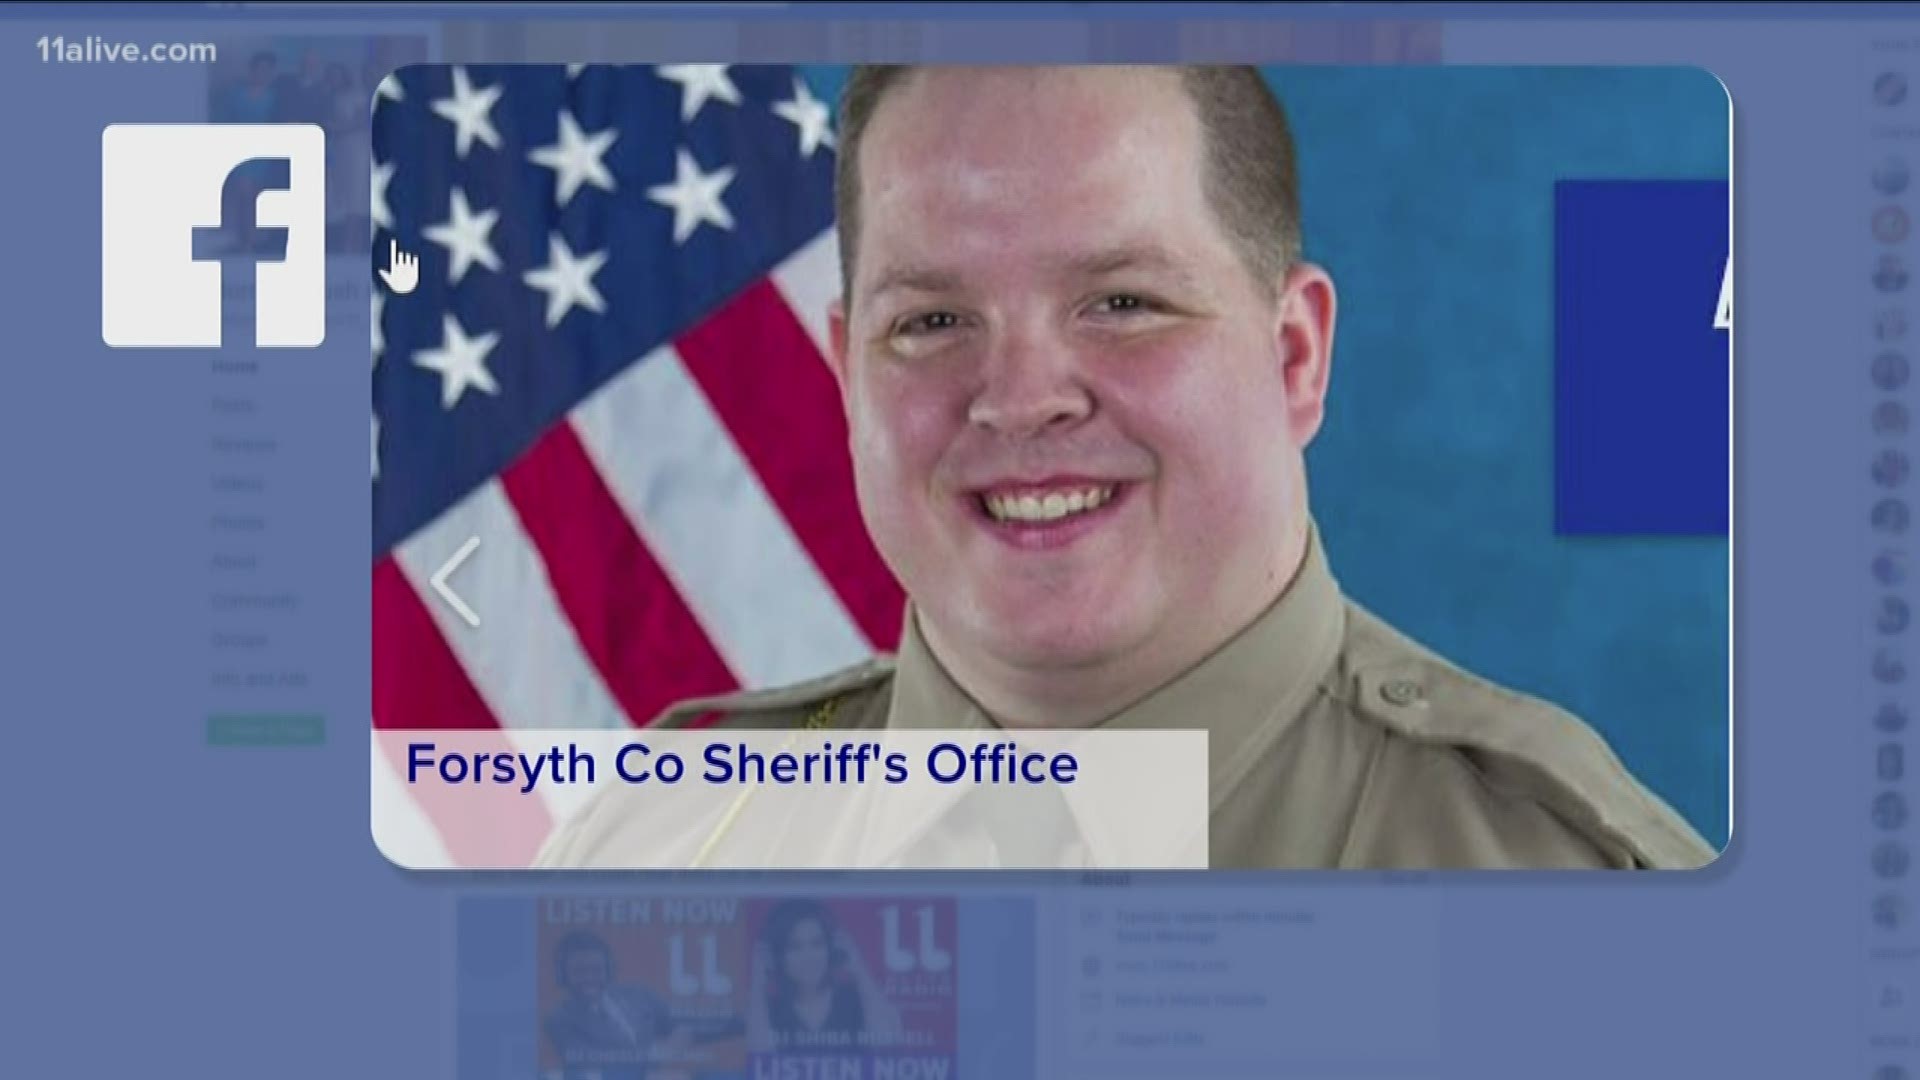 Despite all efforts, the sheriff's office said first responders were unable to save the 29-year-old deputy.